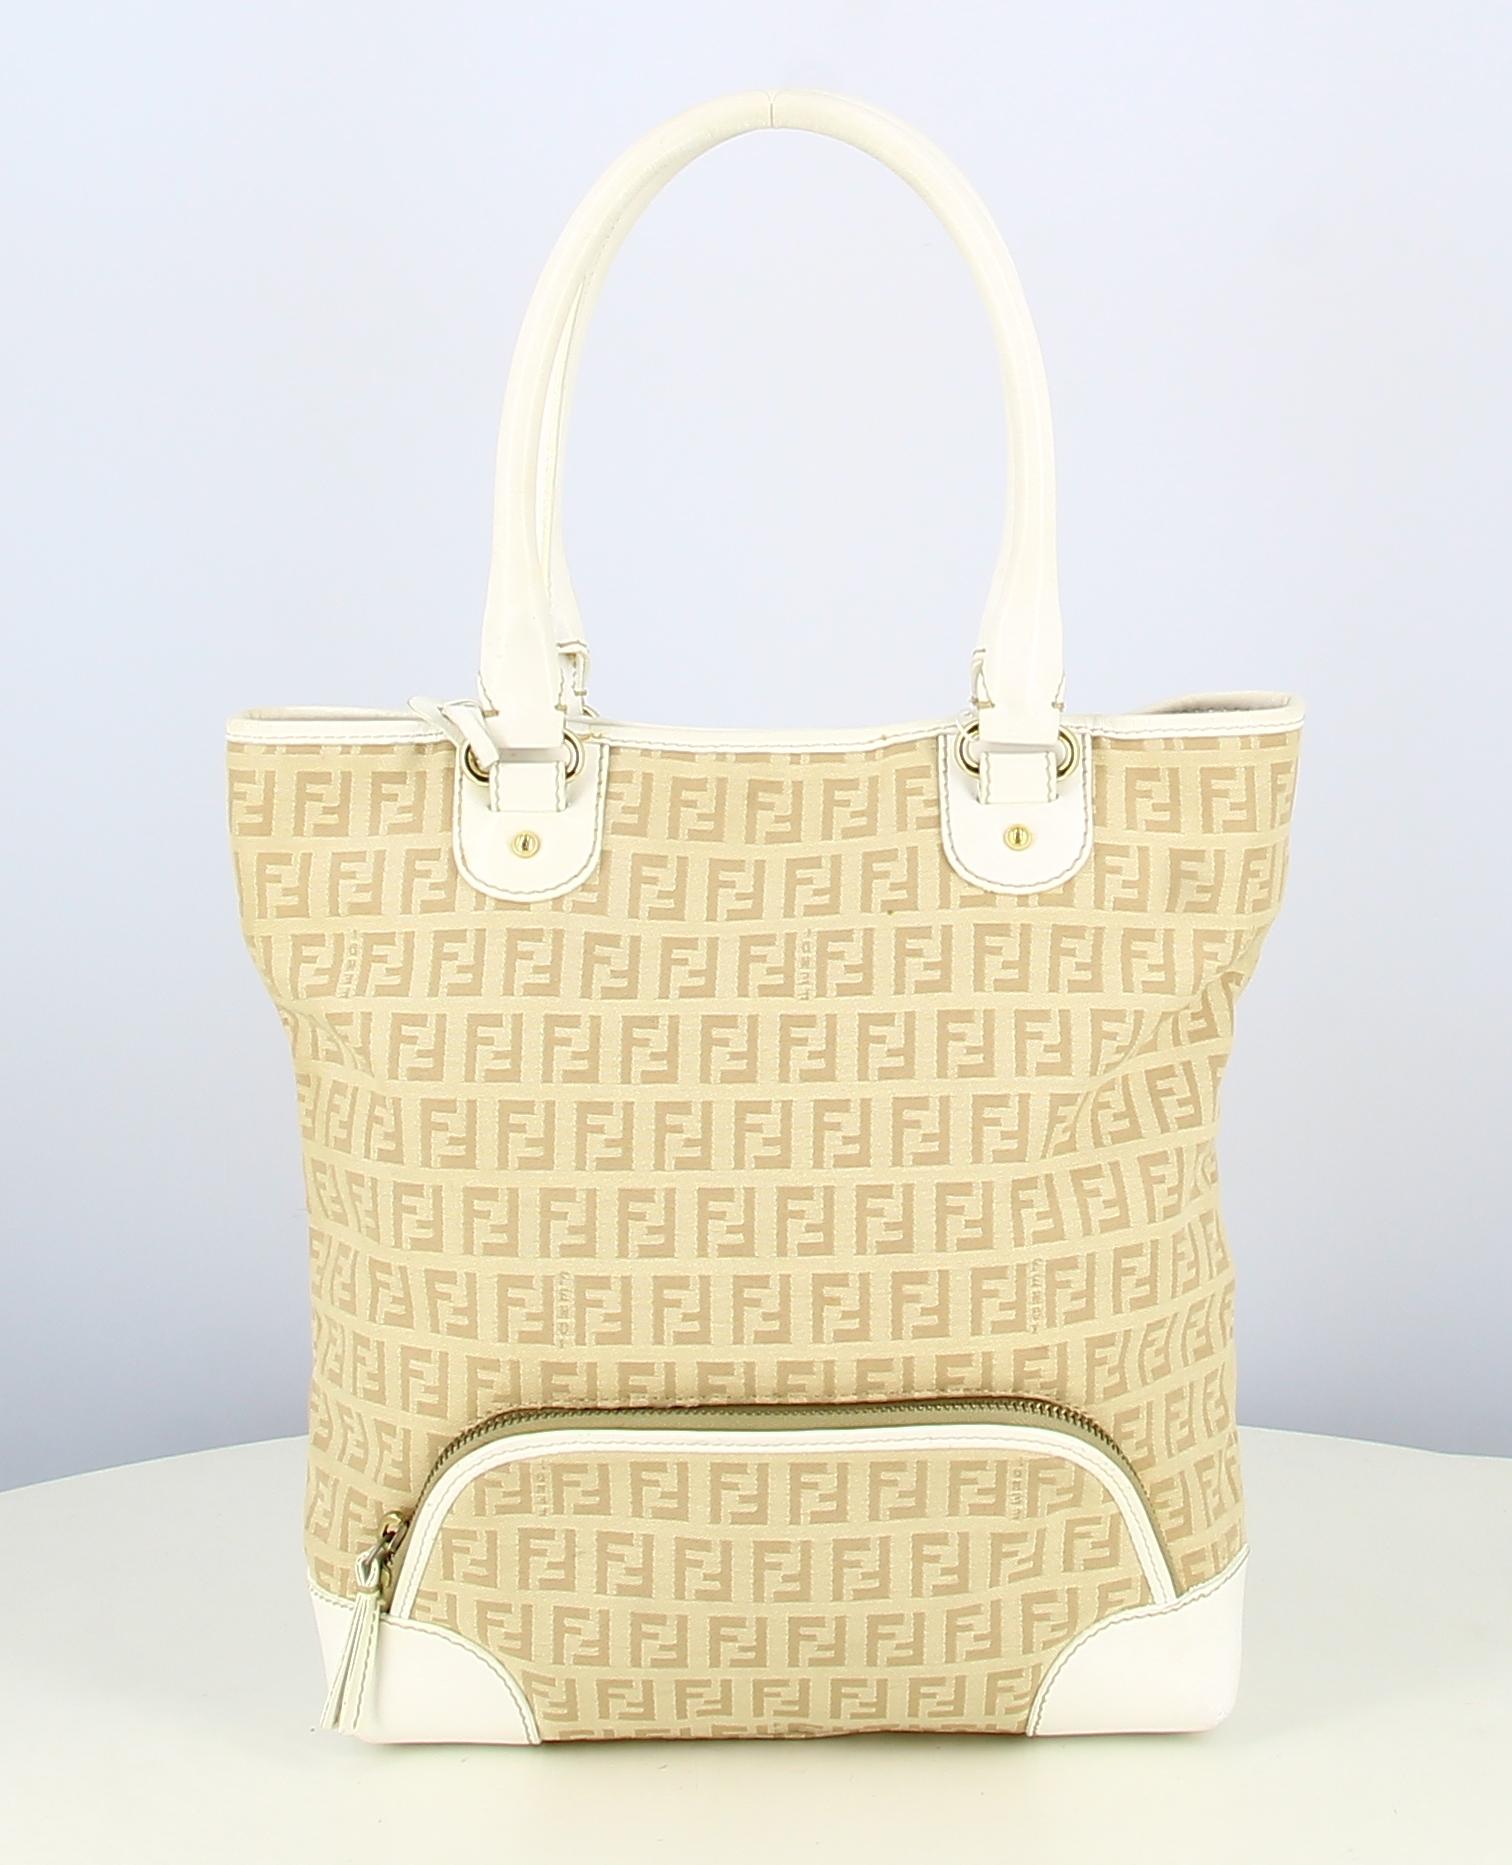 Fendi Monogram Beige And White Handbag

- Good condition It shows signs of wear over time. 
- Fendi Handbag 
- Beige double F monogram
- White leather hanse
- Small zipped front pocket
- Interior: Beige fabric plus small inside pocket 
- Clasp :